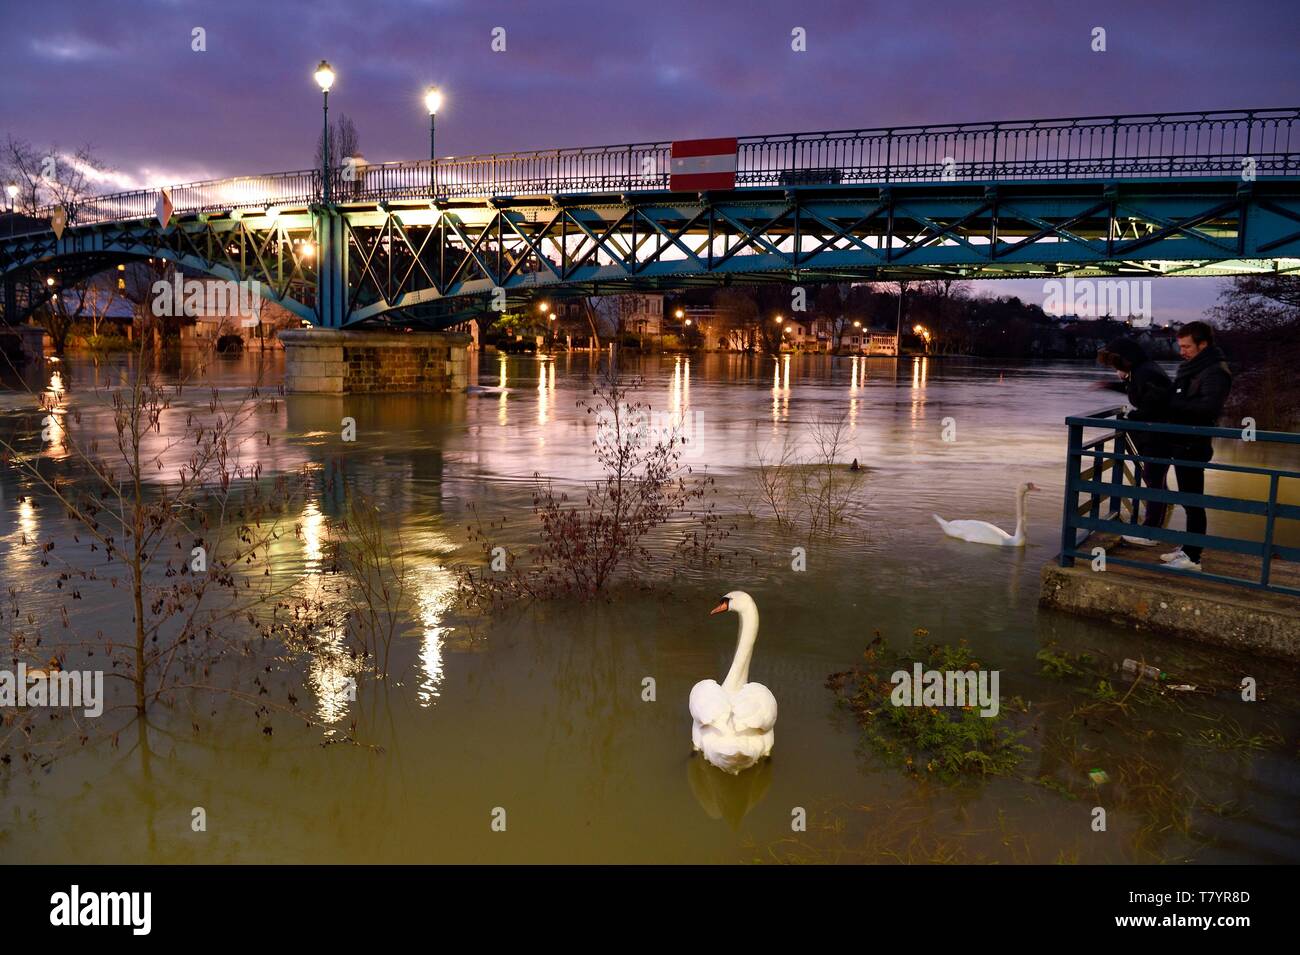 France, Val de Marne, Bry sur Marne, the footbridge made by Gustave Eiffel between Bry sur Marne and Le Perreux sur Marne in the background, the banks of the Marne flooded Stock Photo